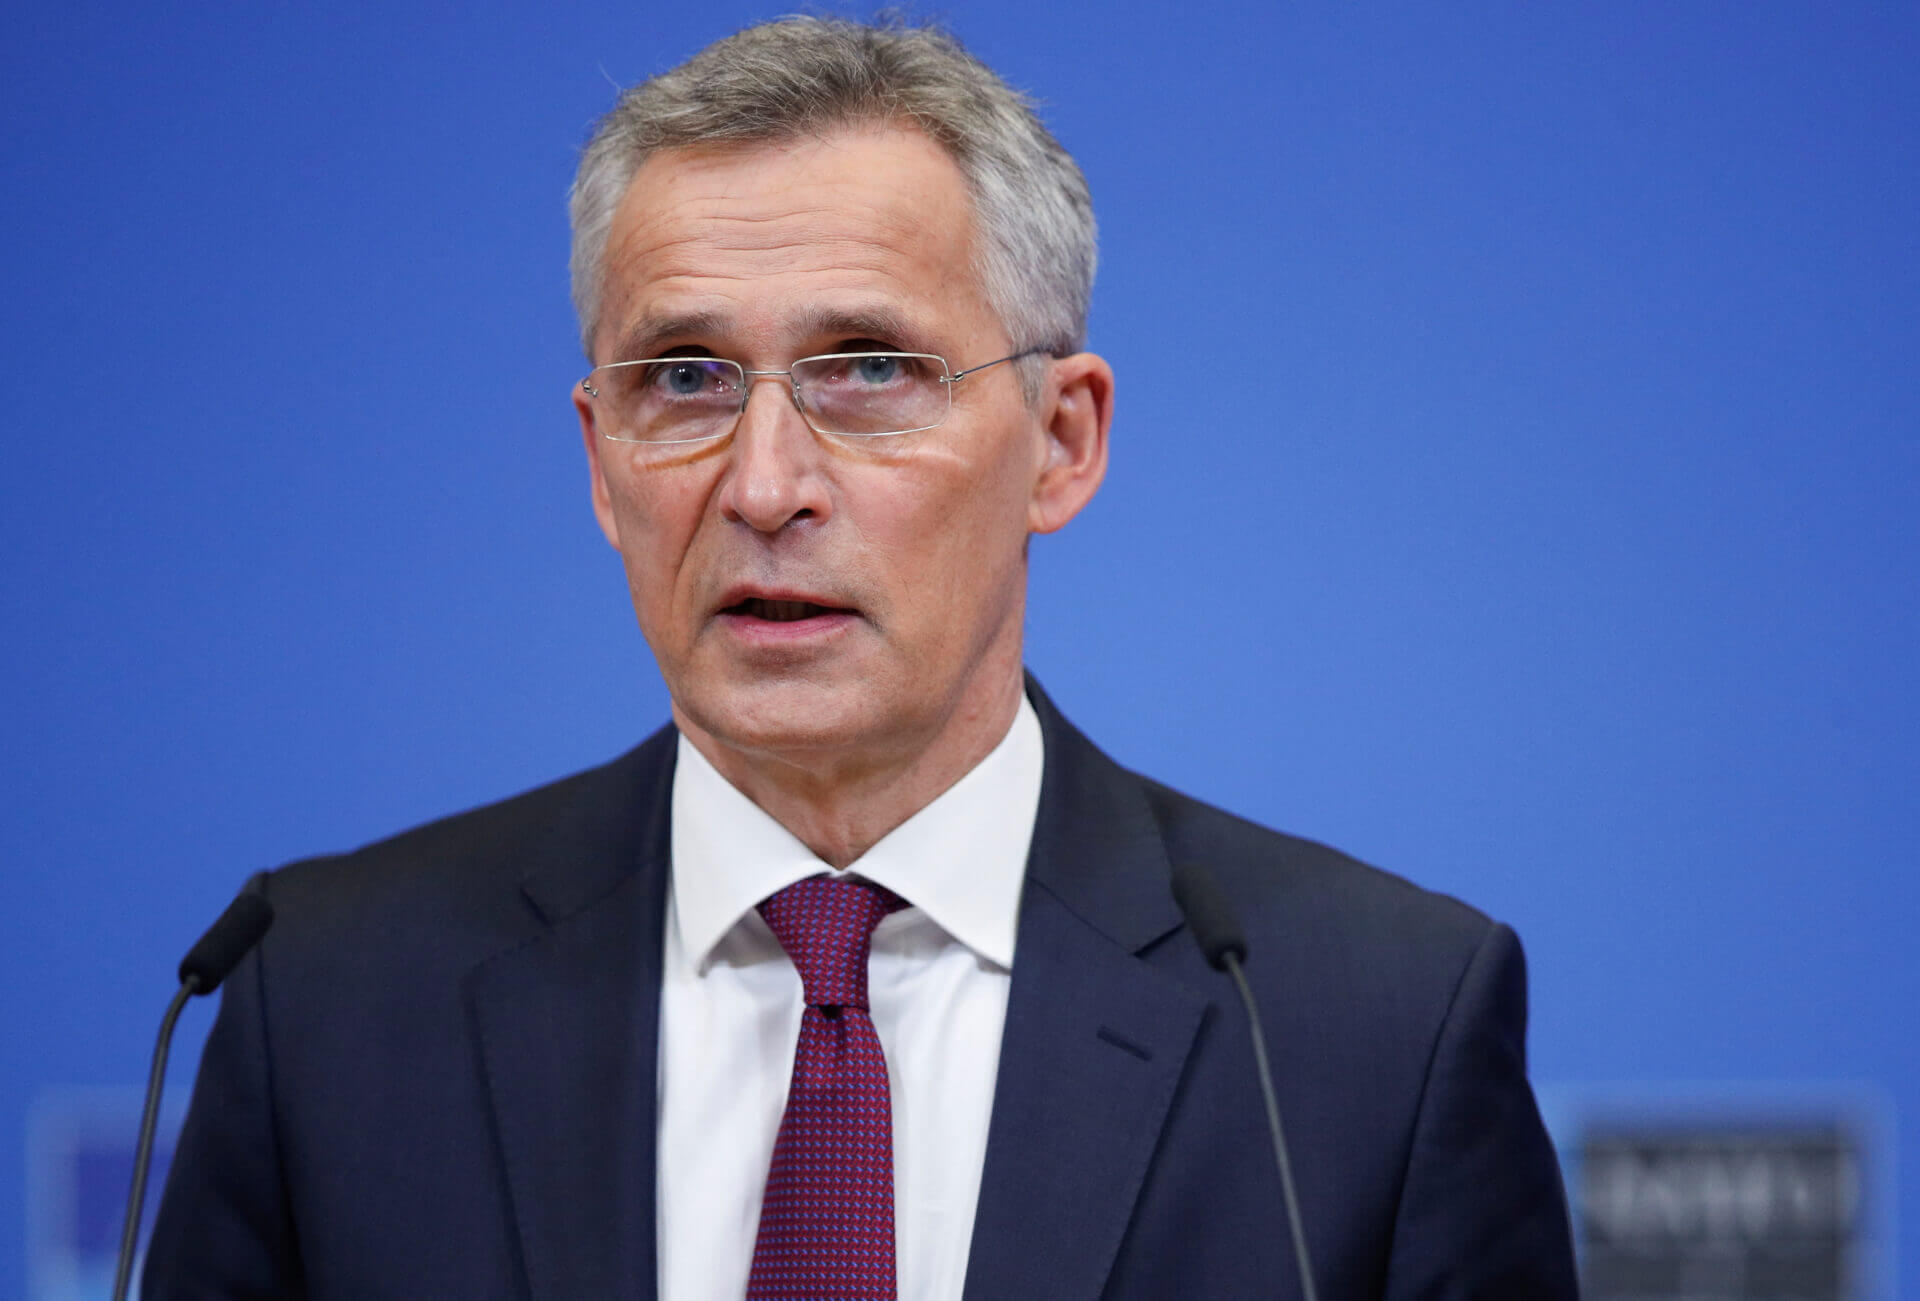 SUMMARY: NATO Leaders Meet at Munich Security Conference